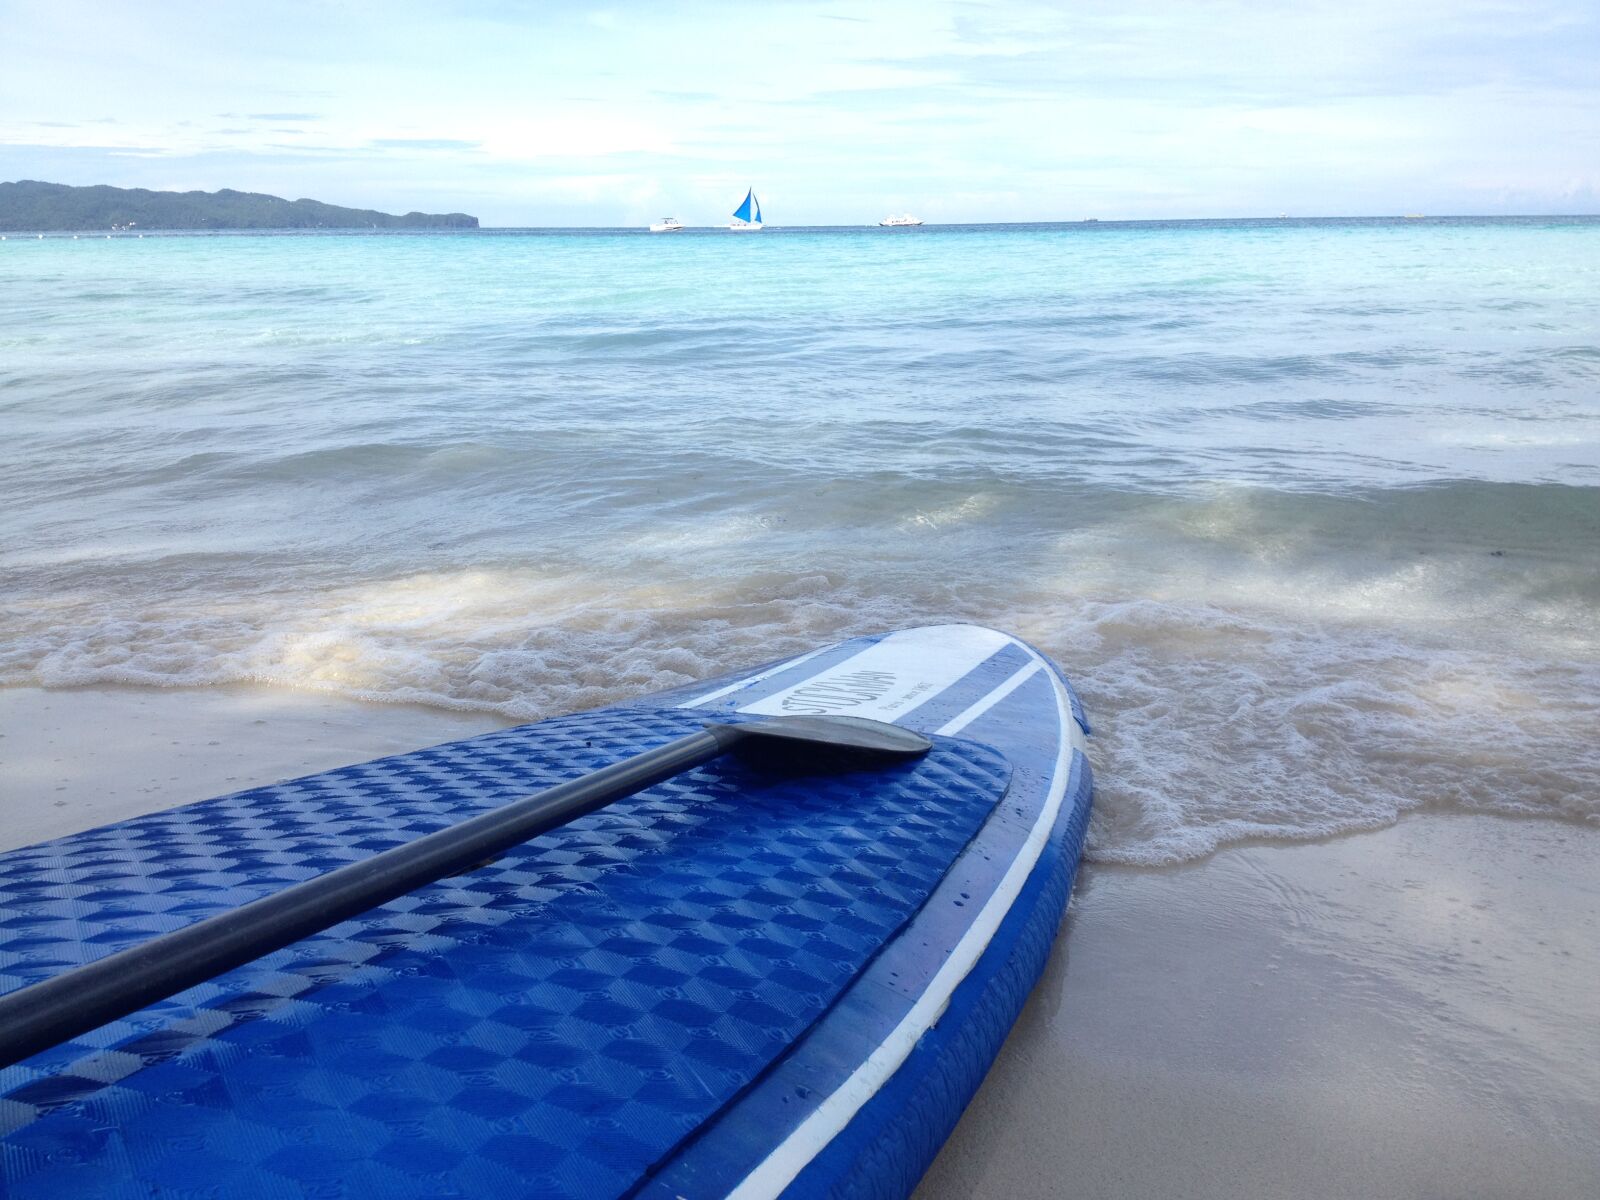 Apple iPhone 4S sample photo. Surf photography